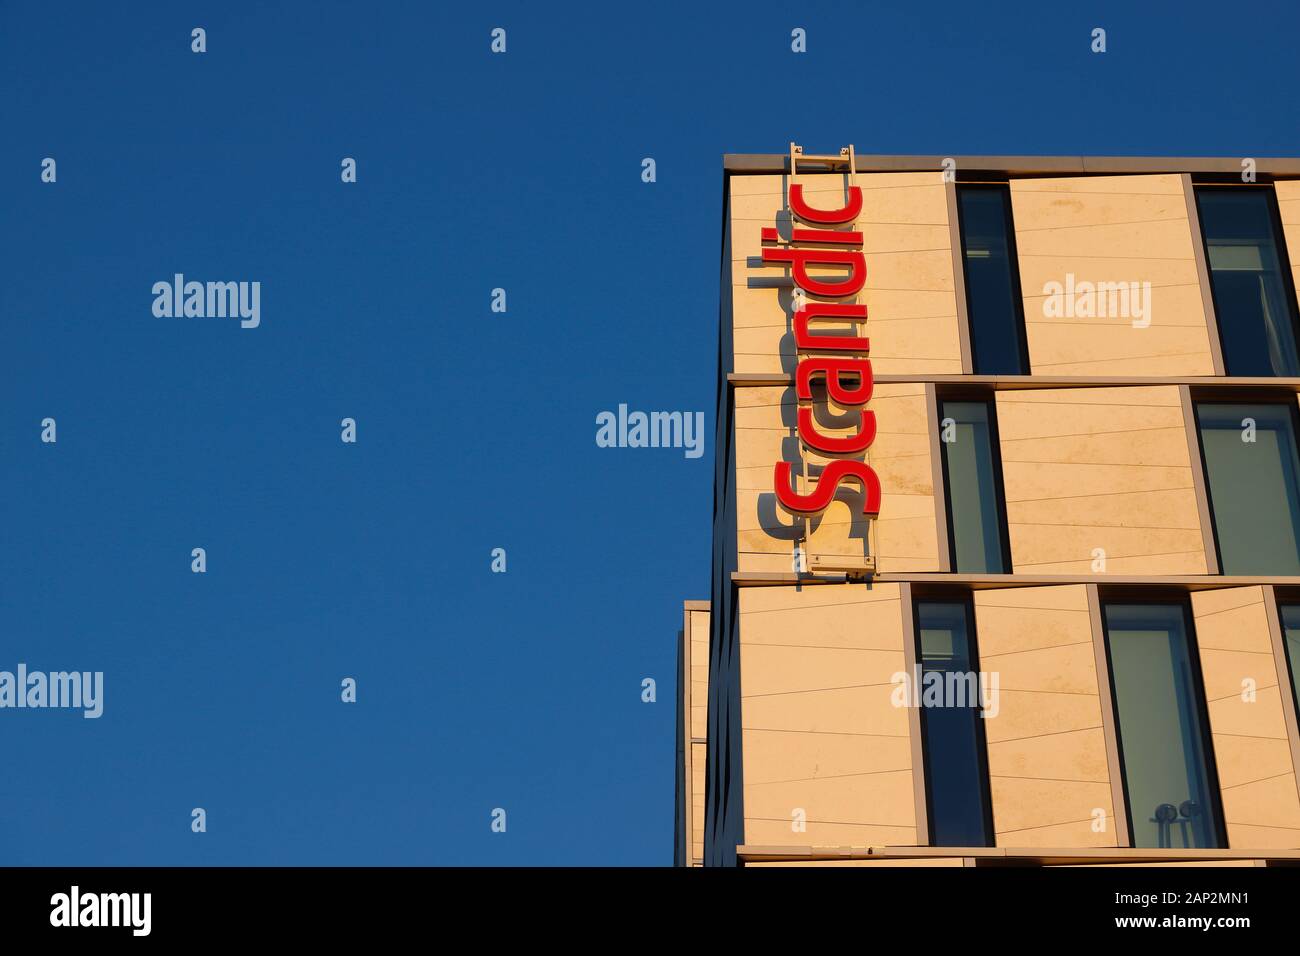 Stockholm, Sweden - January 19, 2020: View of the Scandic Hotels logo at the Continental hotel. Stock Photo